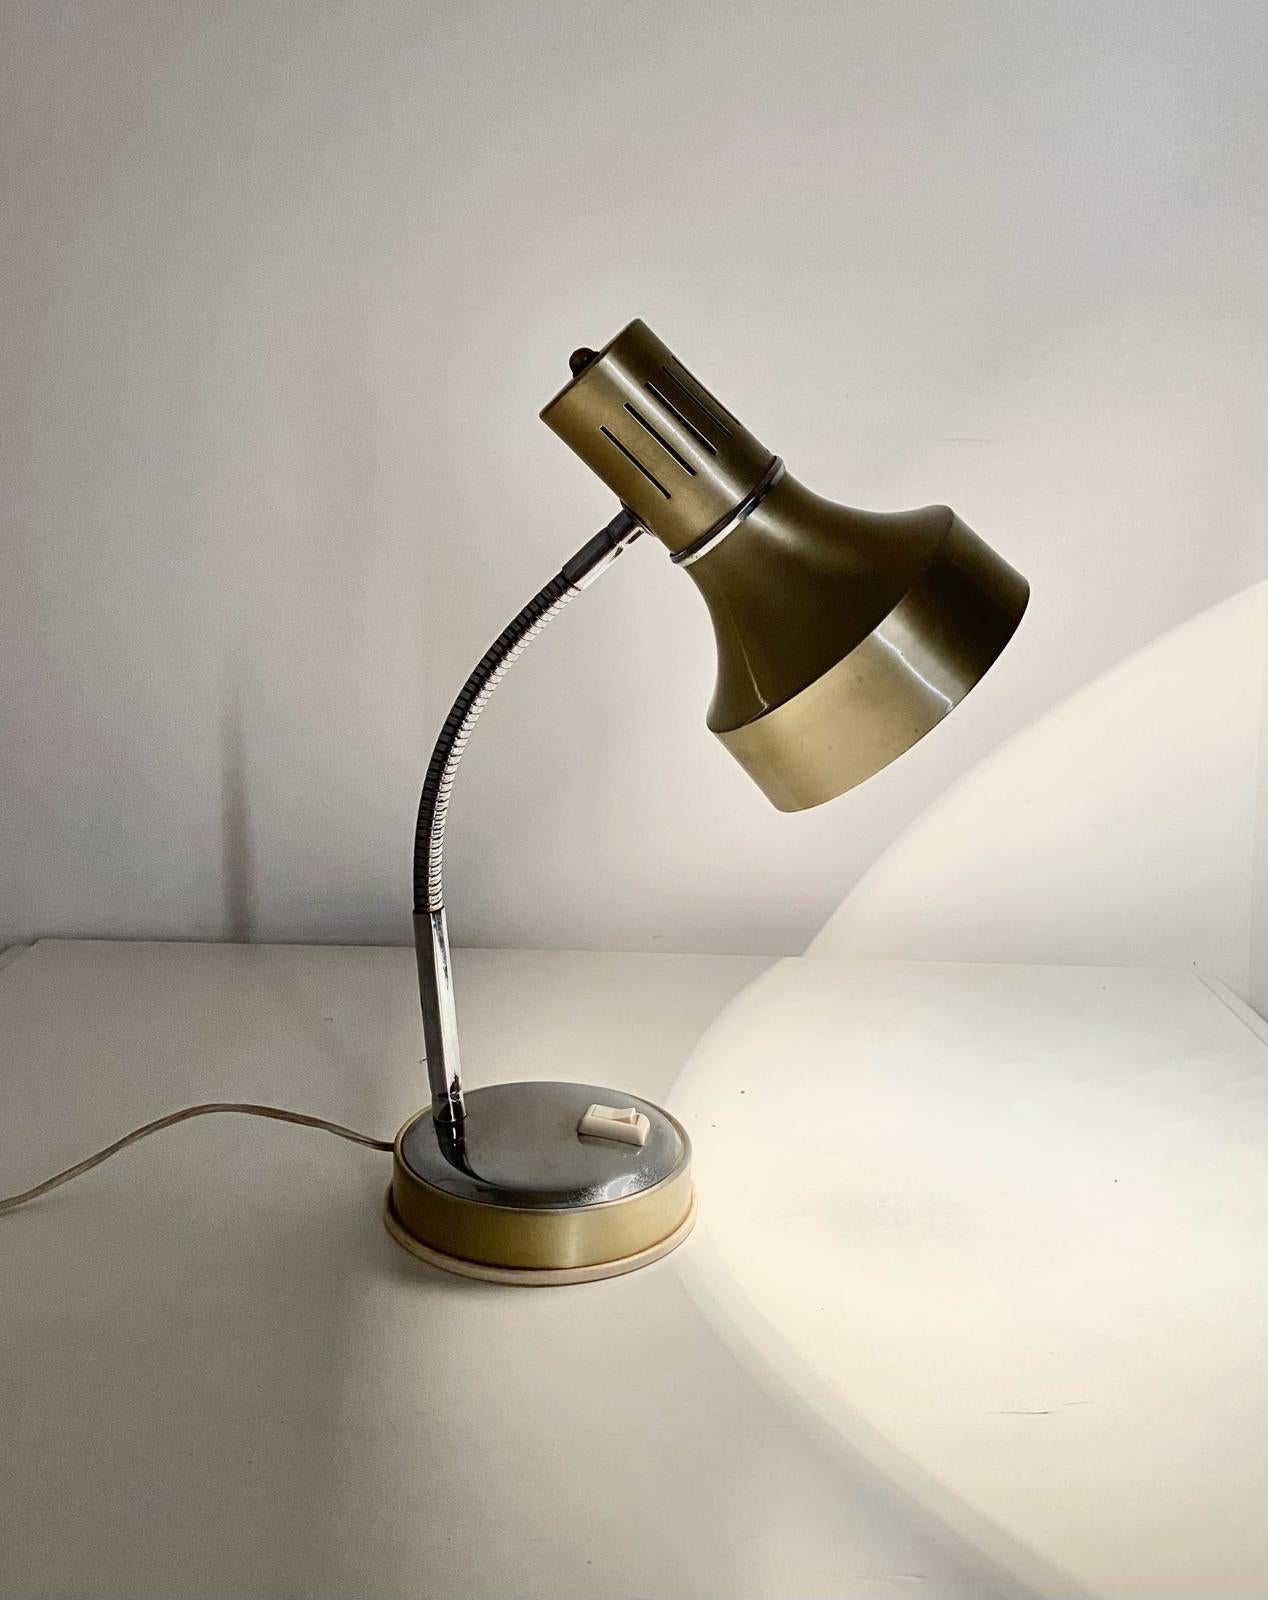 Vintage brass desk lamp in industrial style. Flexible structure. Chromed flexible pole and base. Perfectly working and in really good conditions. 

Please visit our profile page to check our constantly updated 200+ original vintage collection (and